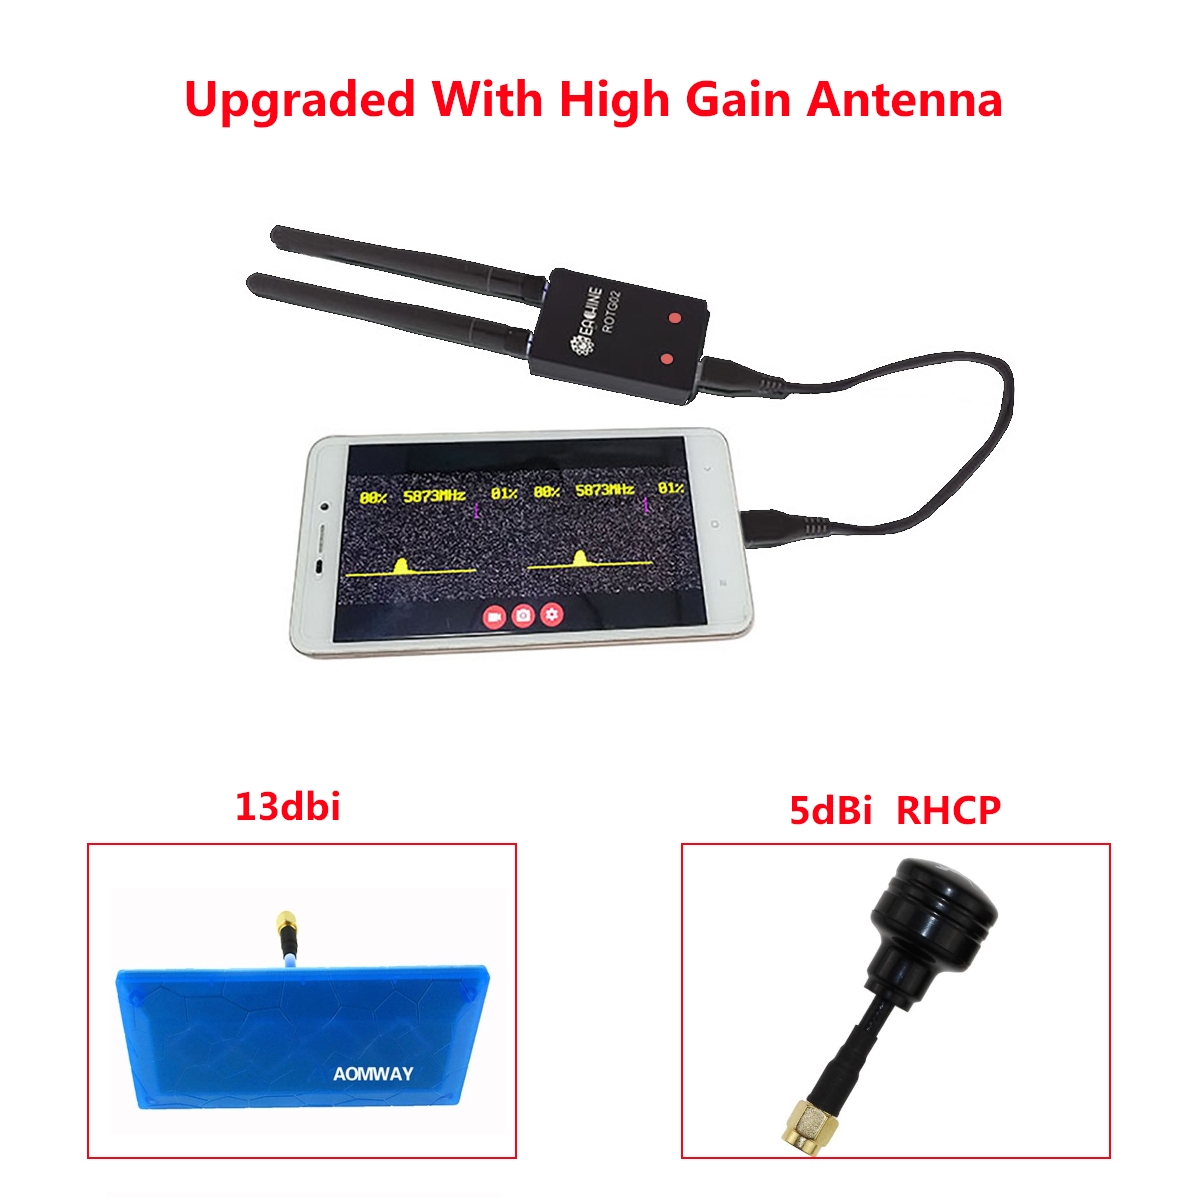 Eachine ROTG02 UVC OTG 5.8G 150CH Diversity Audio FPV Receiver Black with RHCP High Gain Antenna for Android Tablet Smartphone